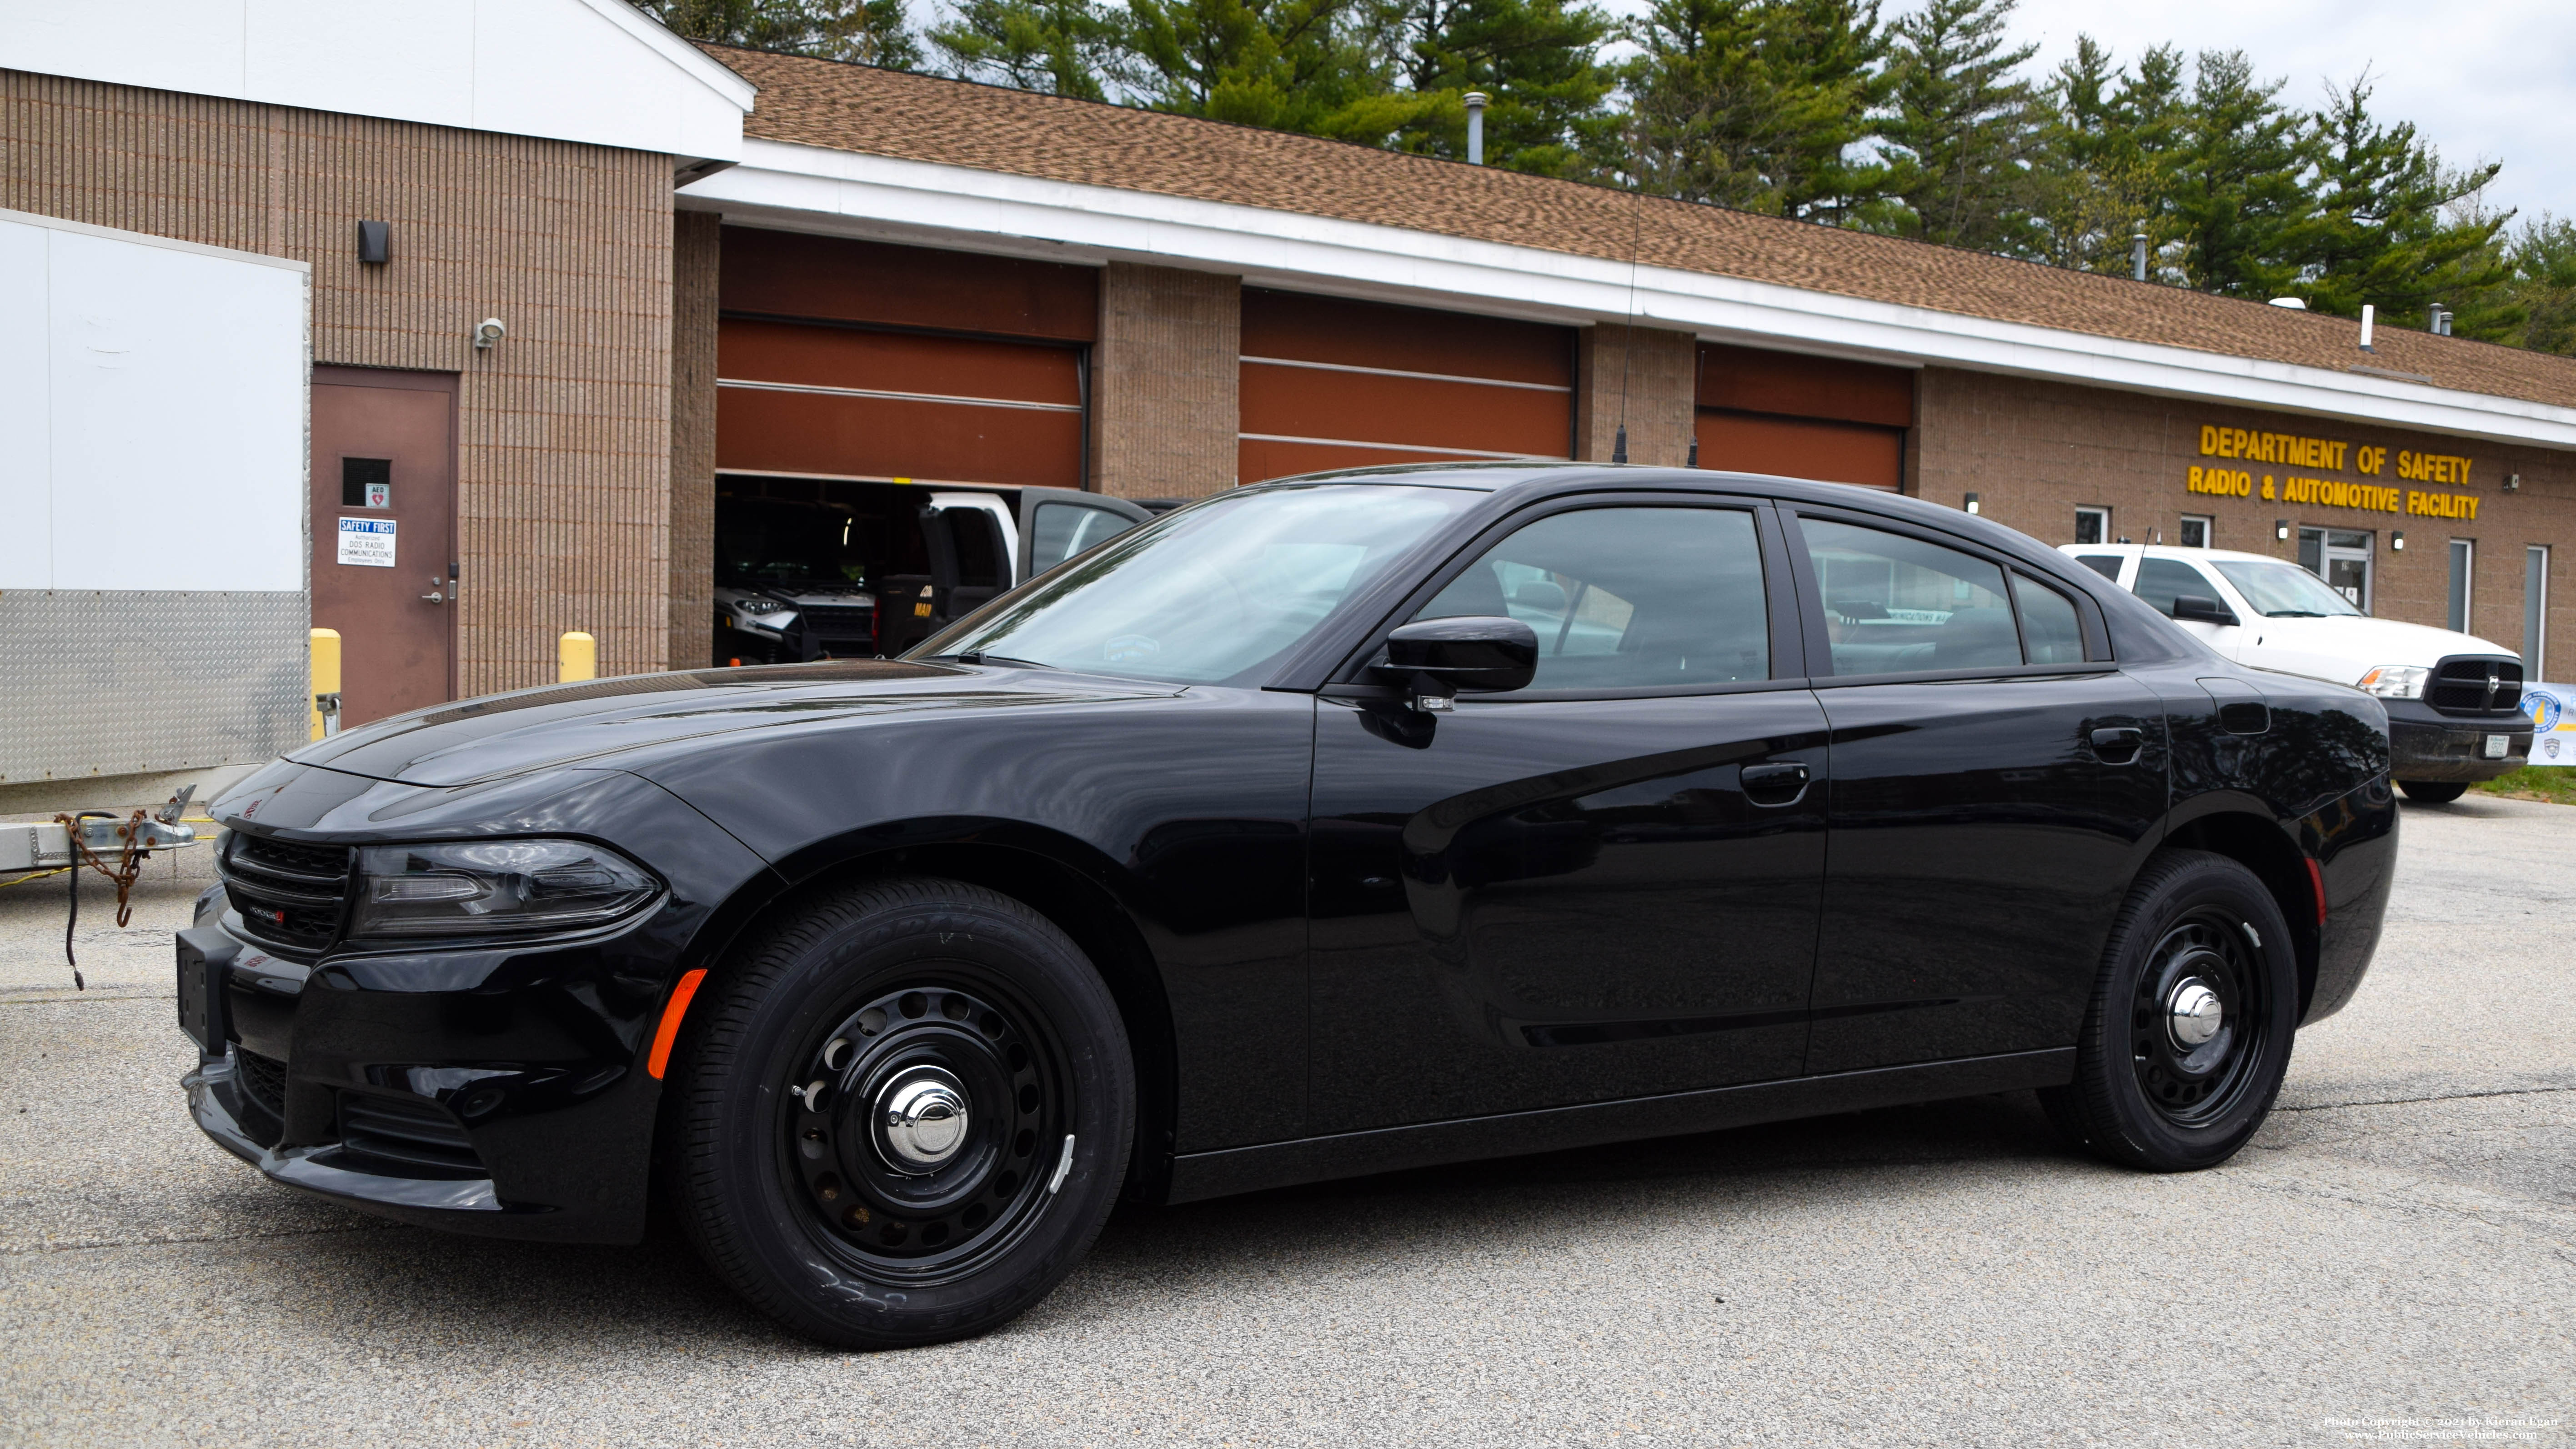 A photo  of New Hampshire State Police
            Cruiser 251, a 2020 Dodge Charger             taken by Kieran Egan